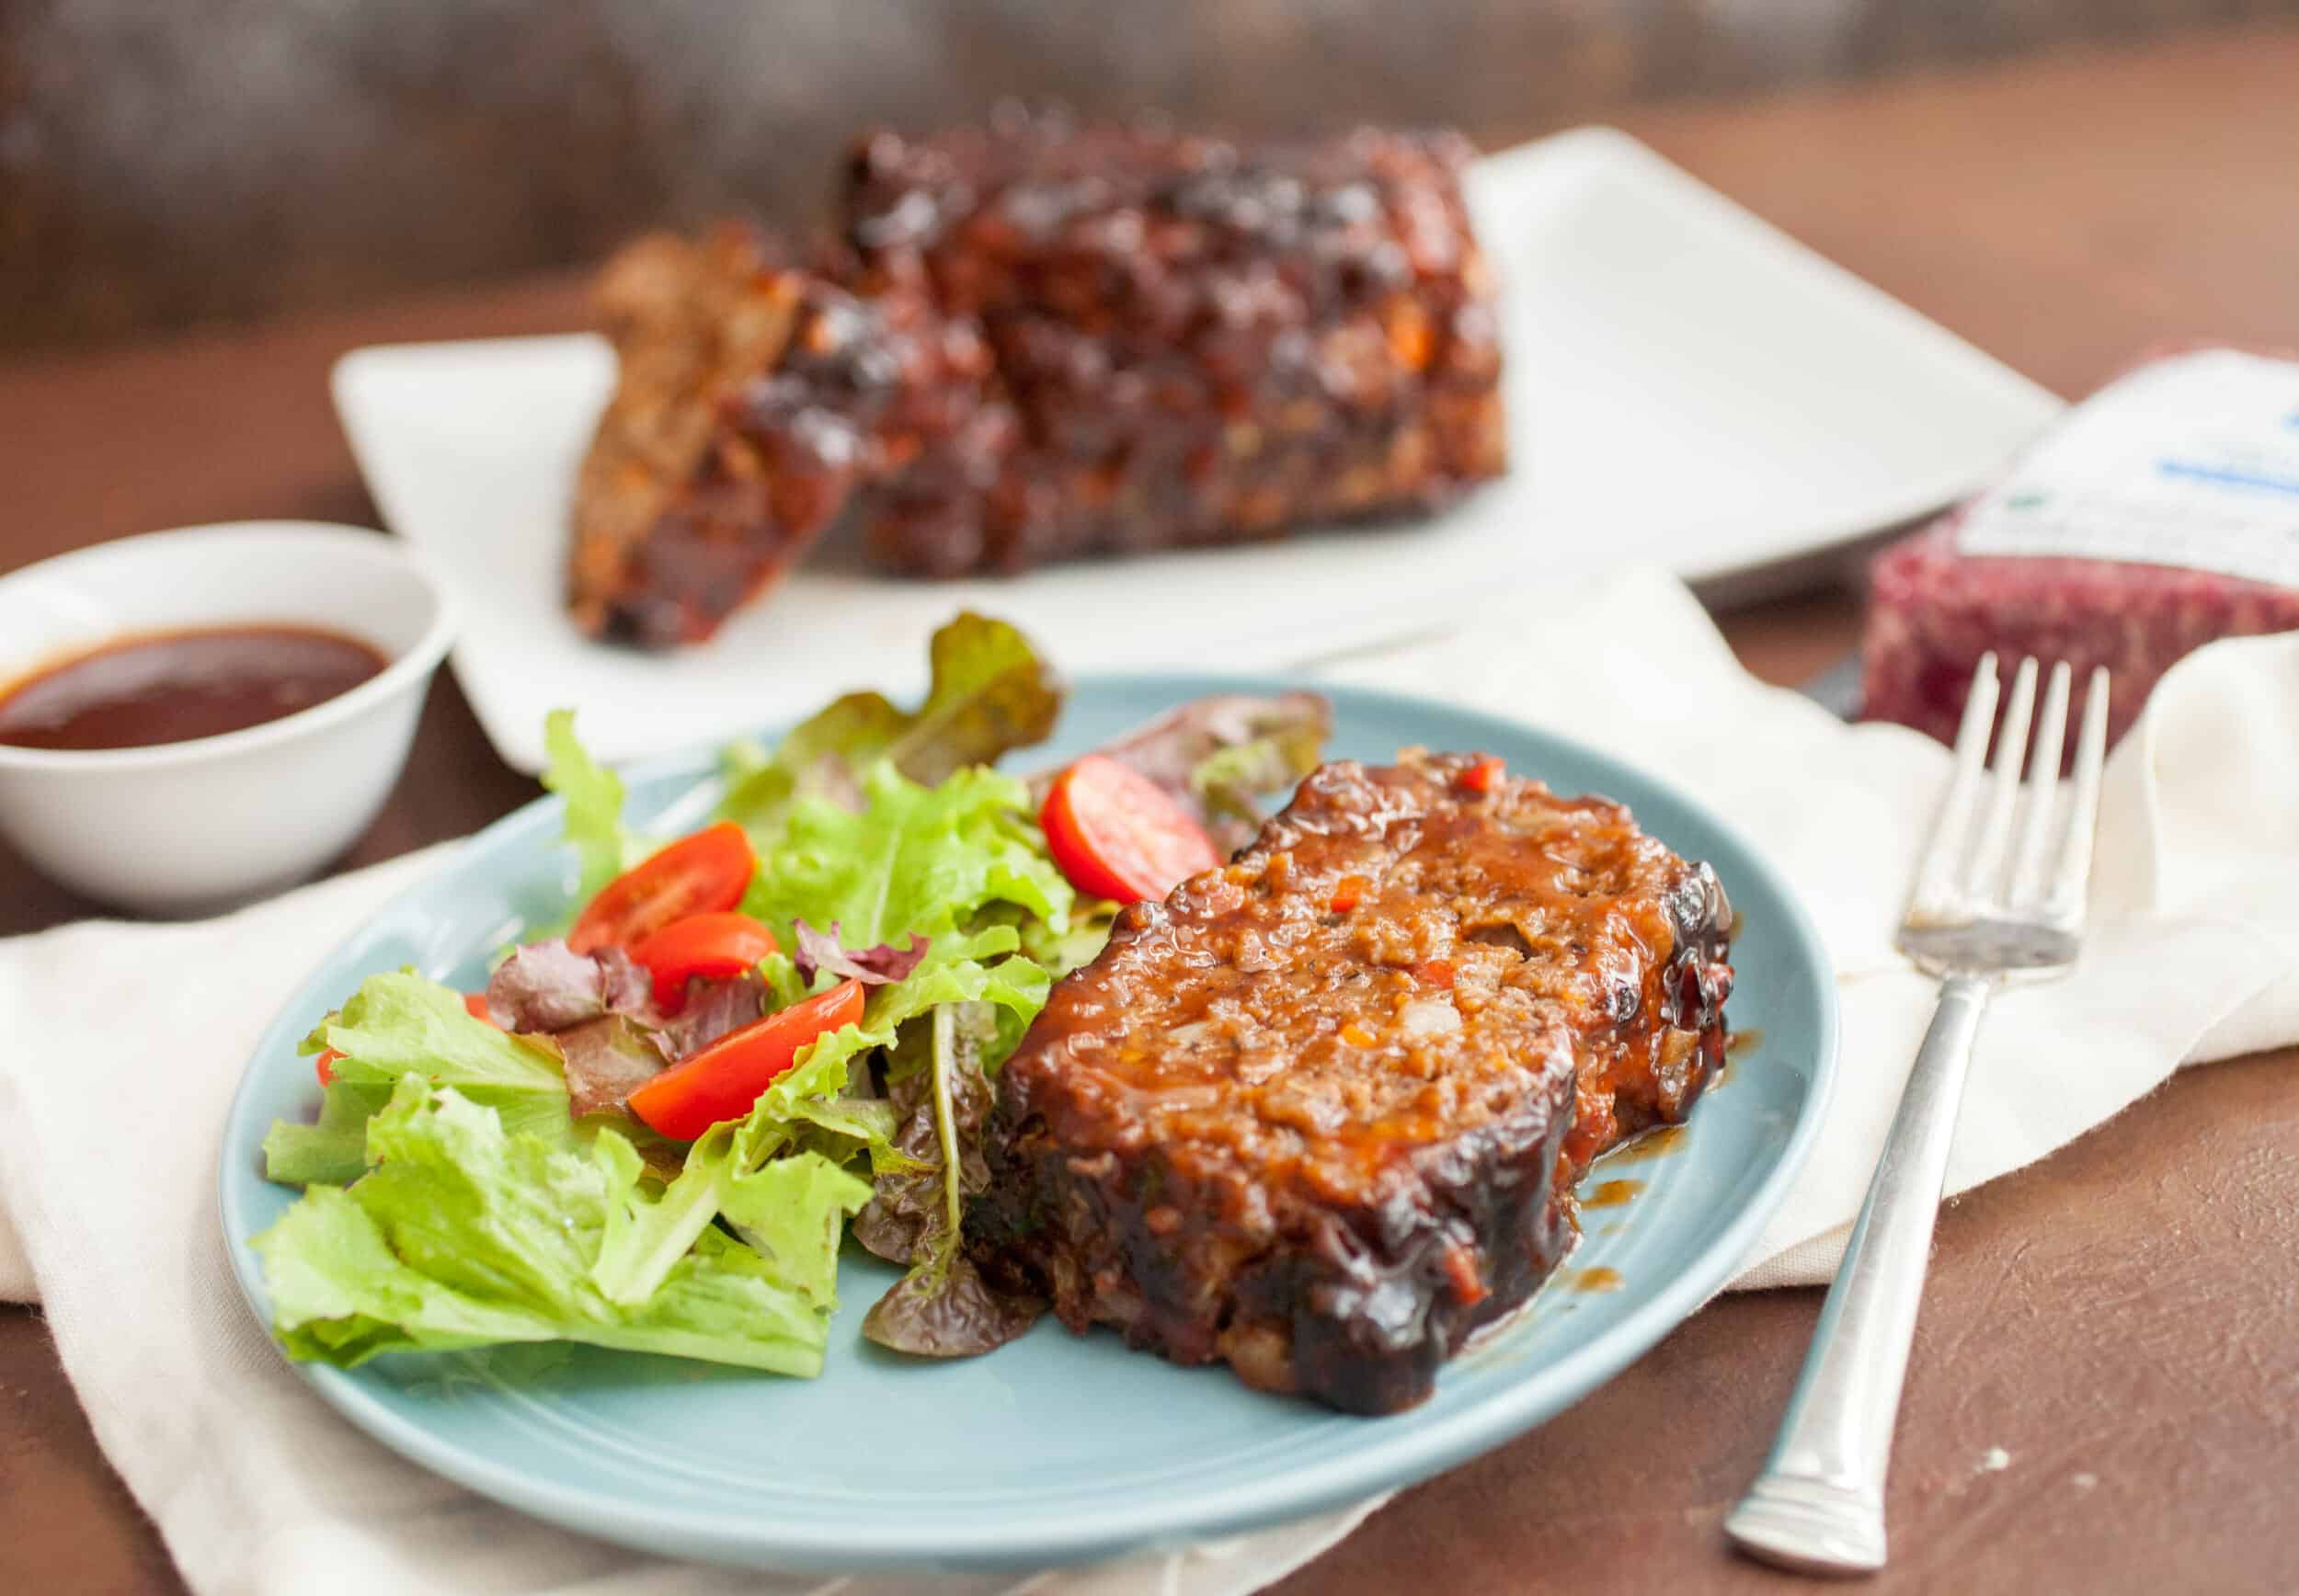 Easy Grilled Meatloaf: This perfect meatloaf is easy to make on the grill so you can keep your oven off during the hot days! The flavors are smoky and delicious! Great served with a simple salad or sliced and made into sandwiches! | macheesmo.com